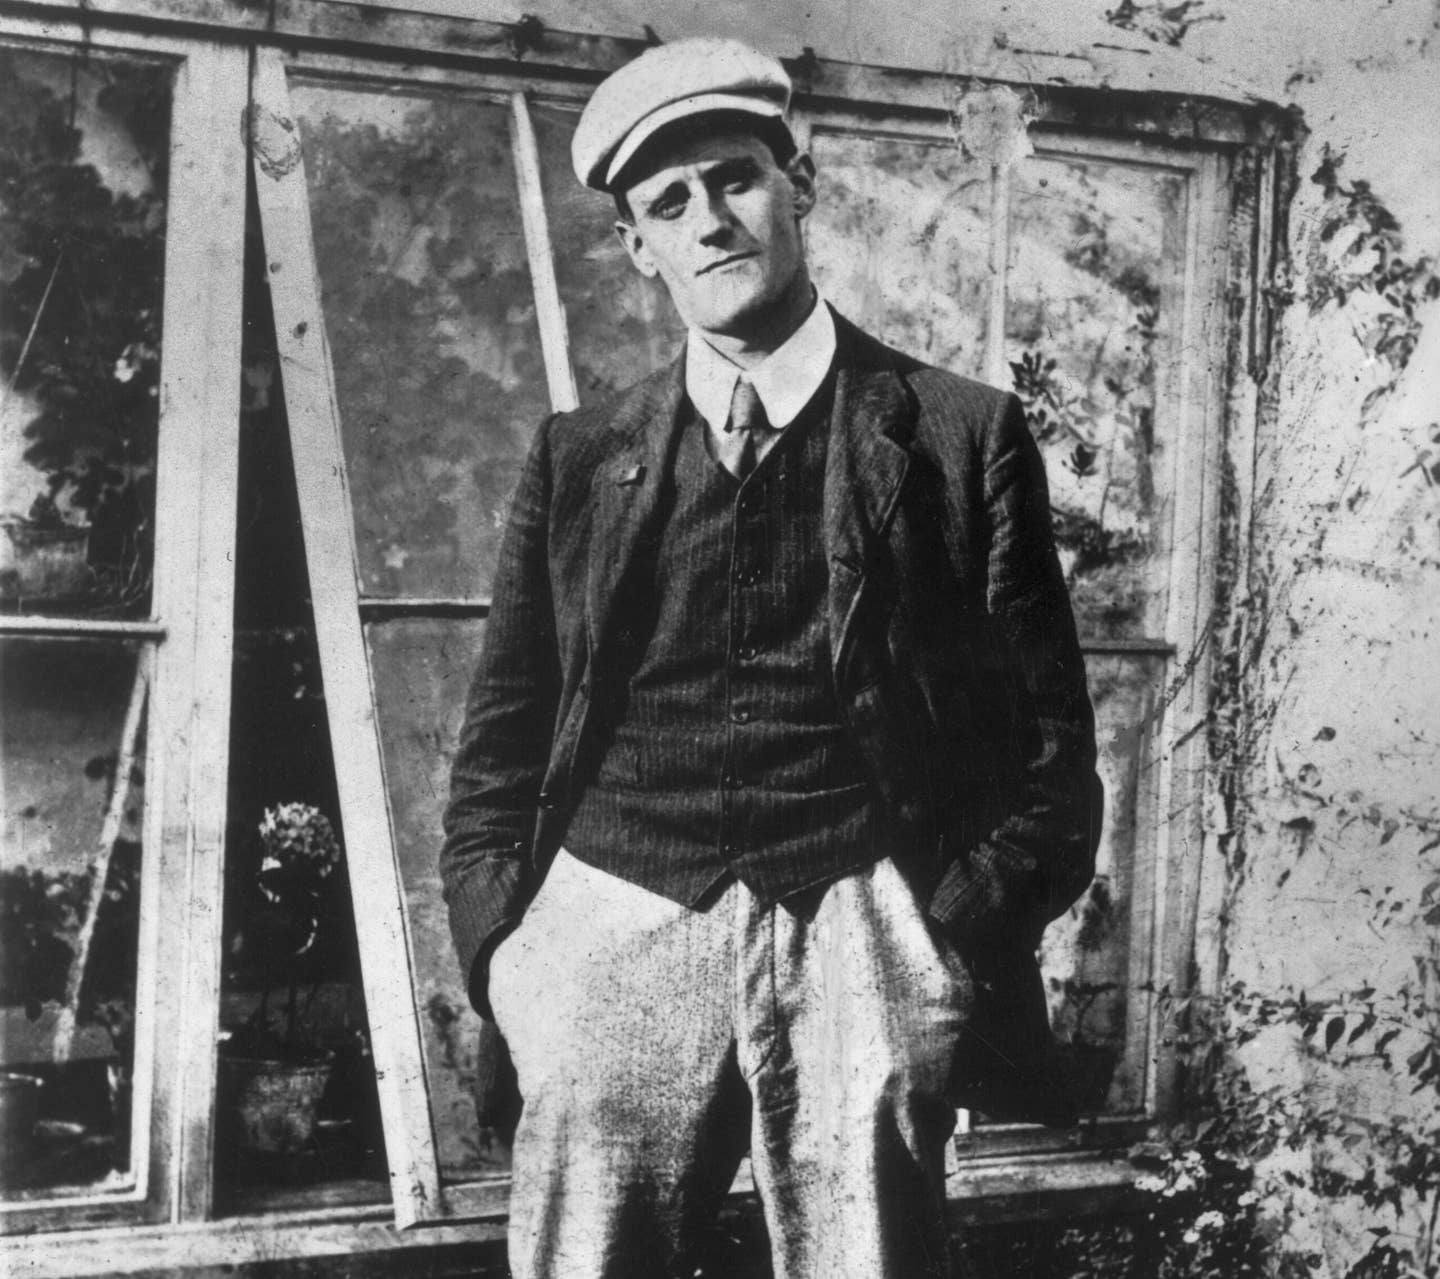 1904:  Portrait of Irish writer James Joyce, (1882 - 1941) aged 22, standing outdoors.  (Photo by C. P. Curran/Hulton Archive/Getty Images)